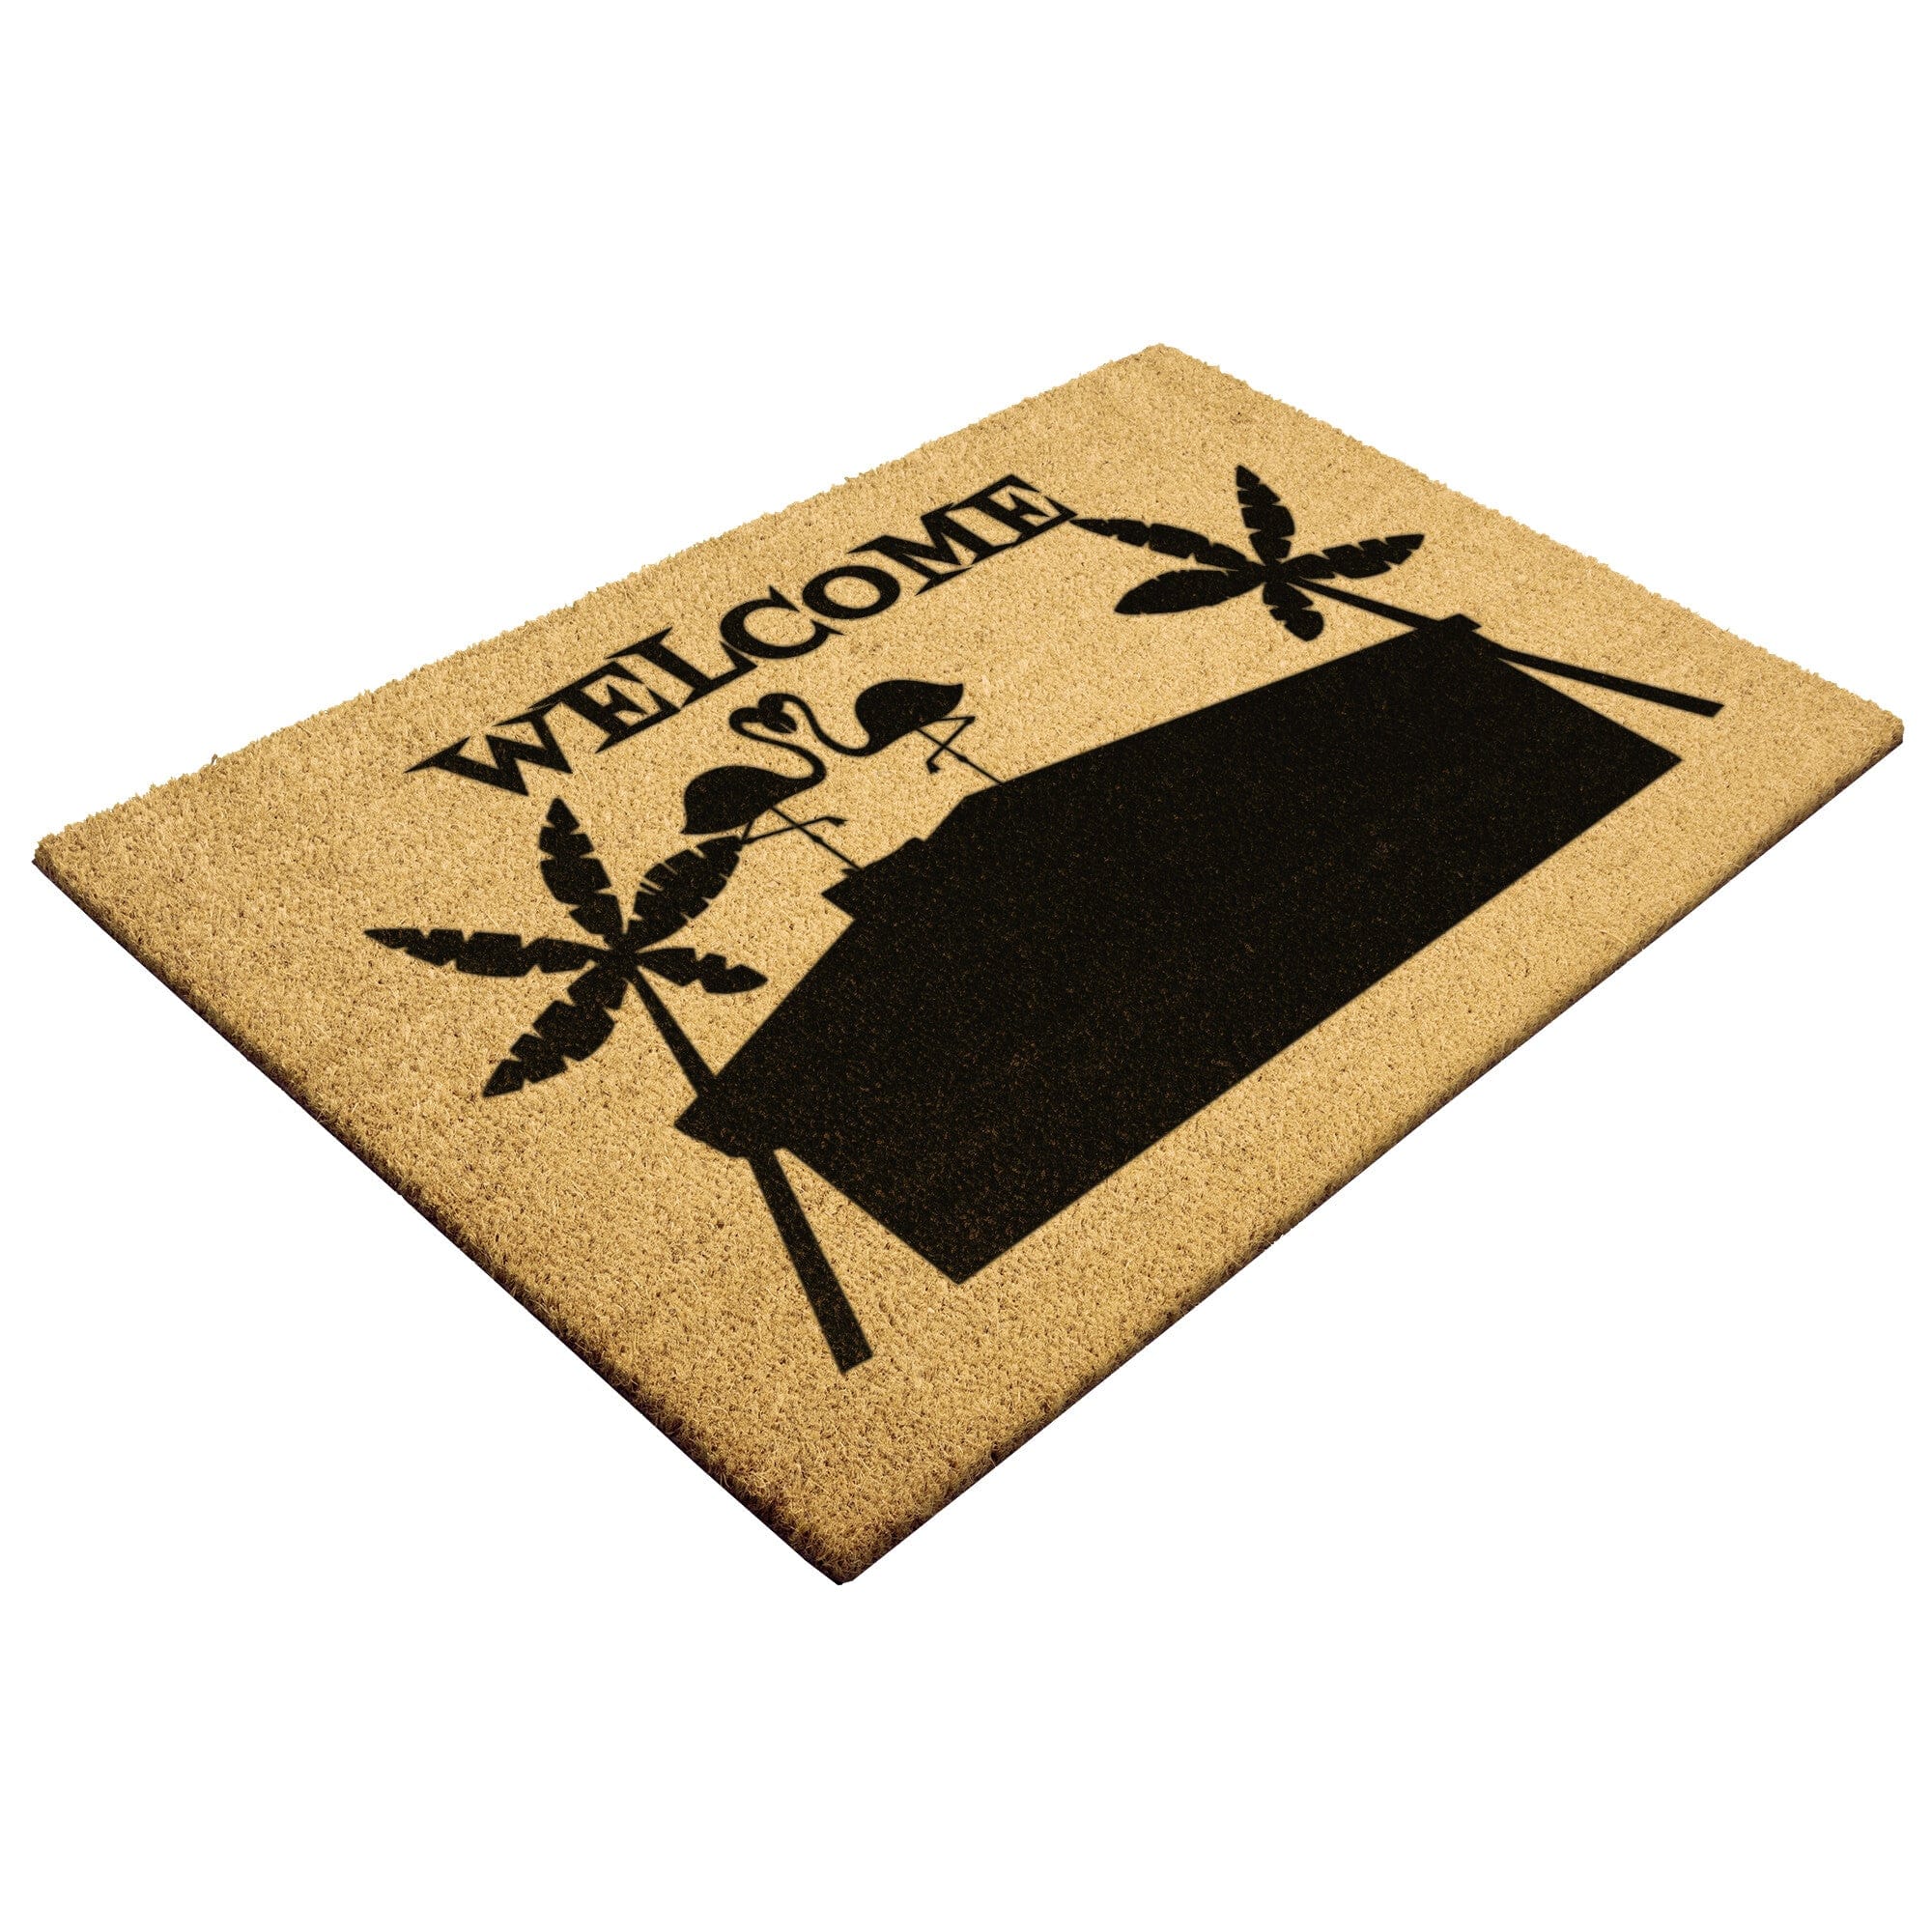 Mid Century Modern Home Style, Welcome Mat, Flamingo, Palm Trees, Retro Welcome Mat, Housewarming,  New Home Entry Way Door Mat Home Goods